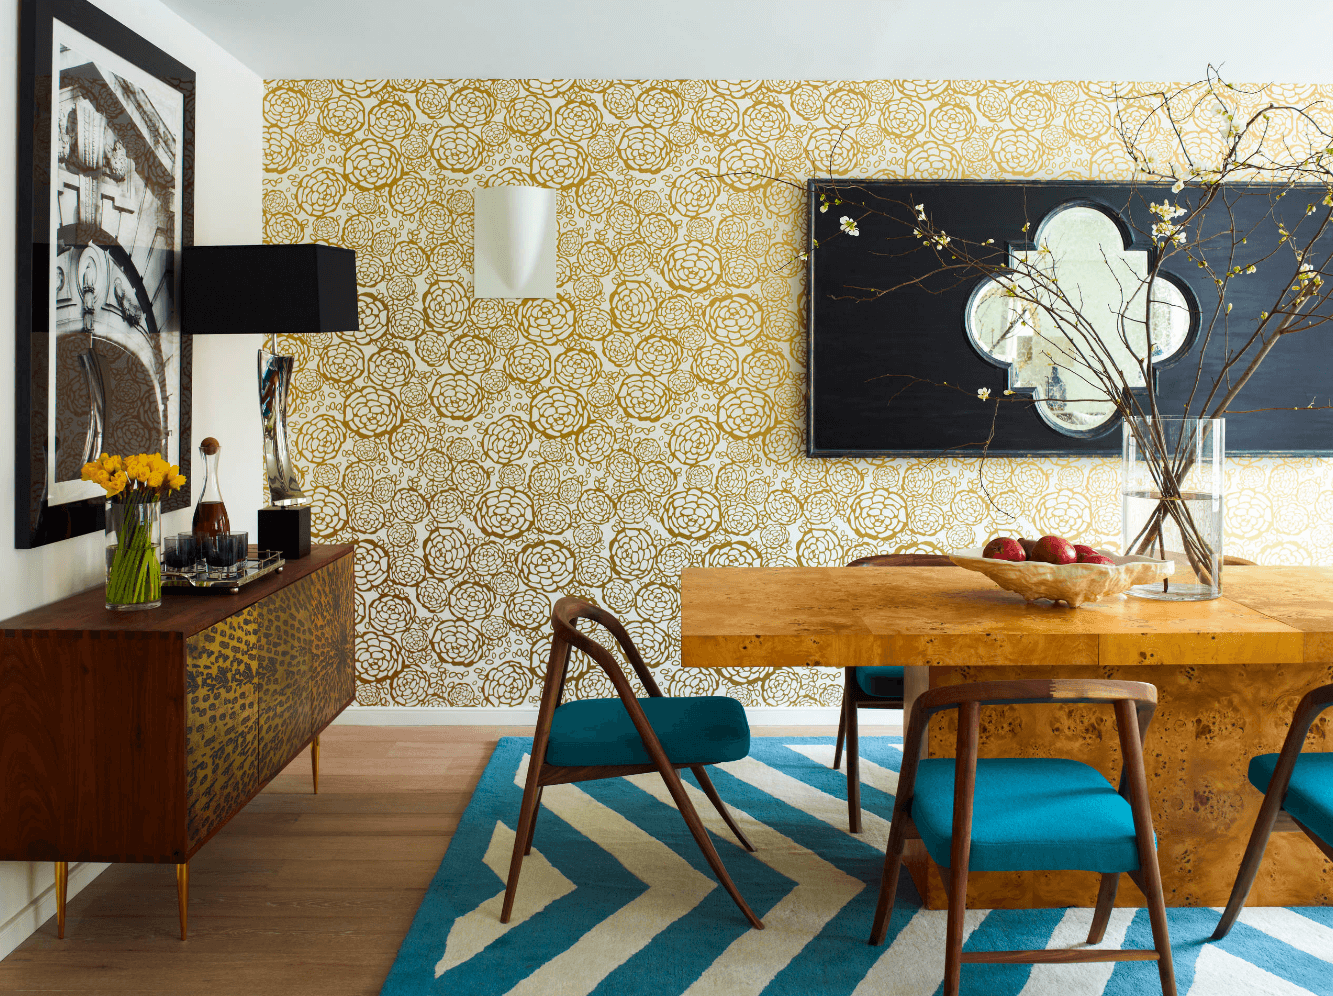 Tips to Help You Choose the Right Wallpaper for Interior Design